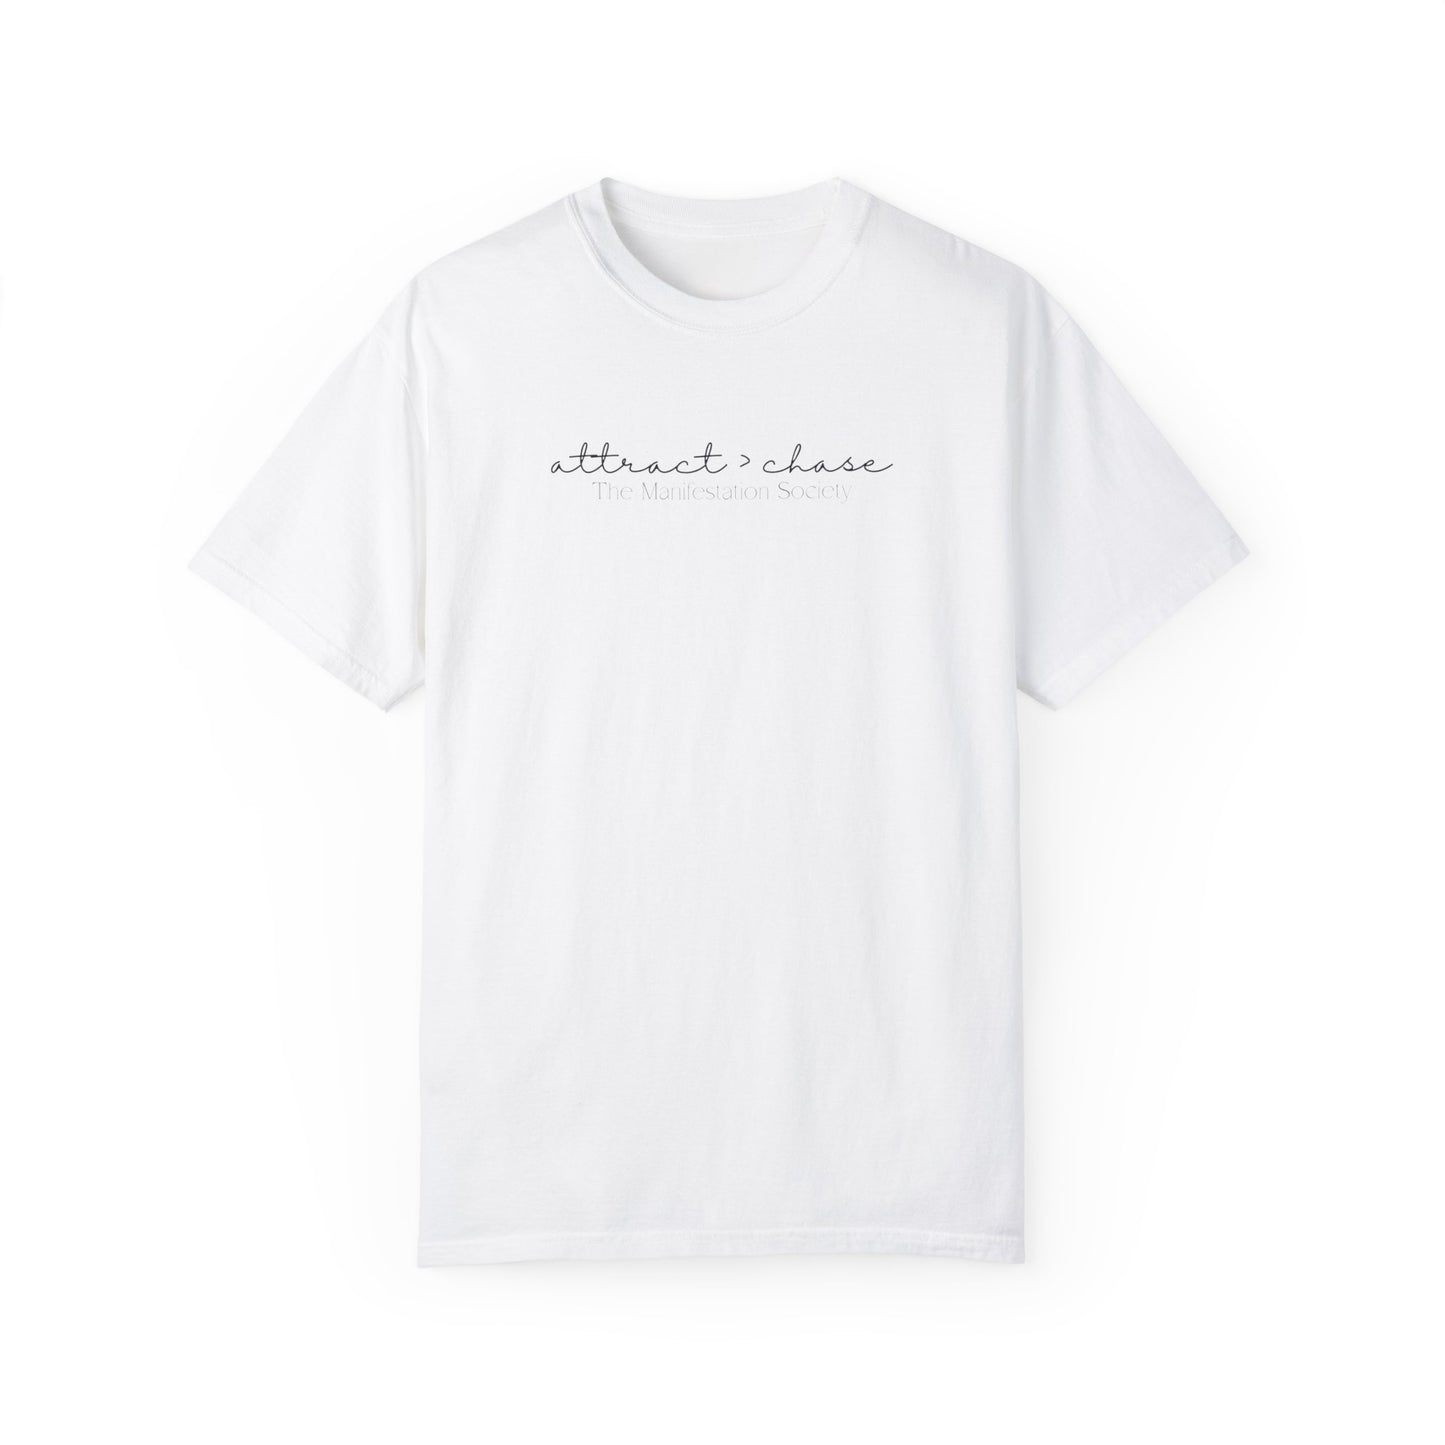 Attract > Chase Tee by The Manifestation Society.